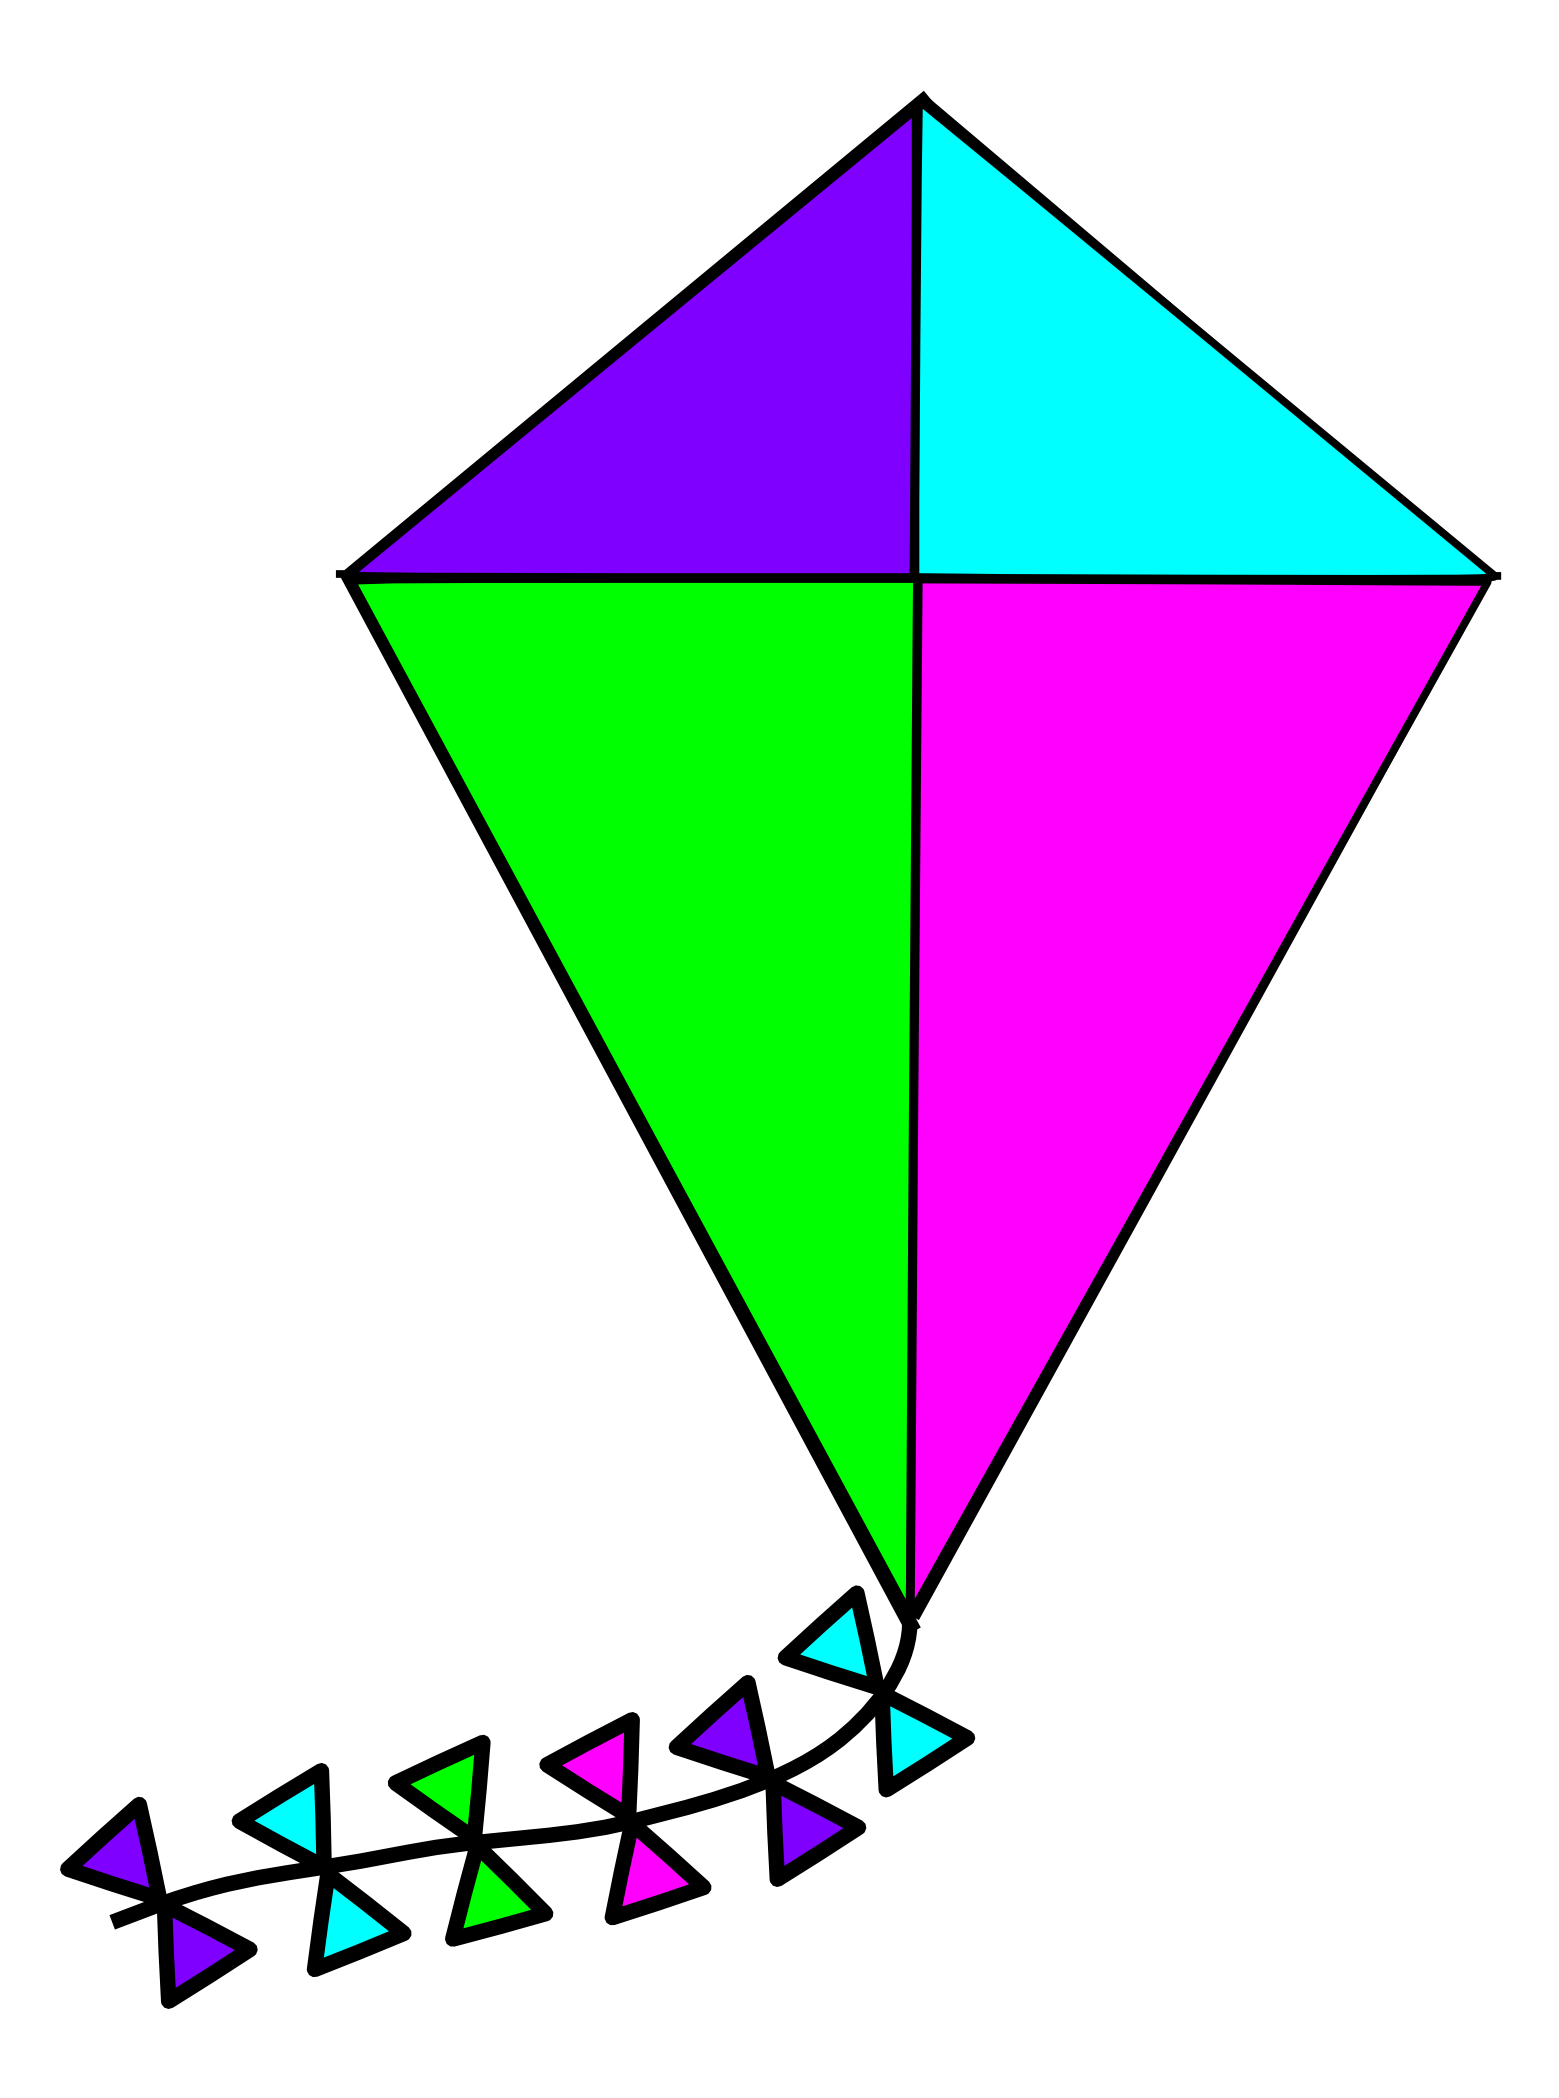 A Colorful Kite With Many Small Triangles